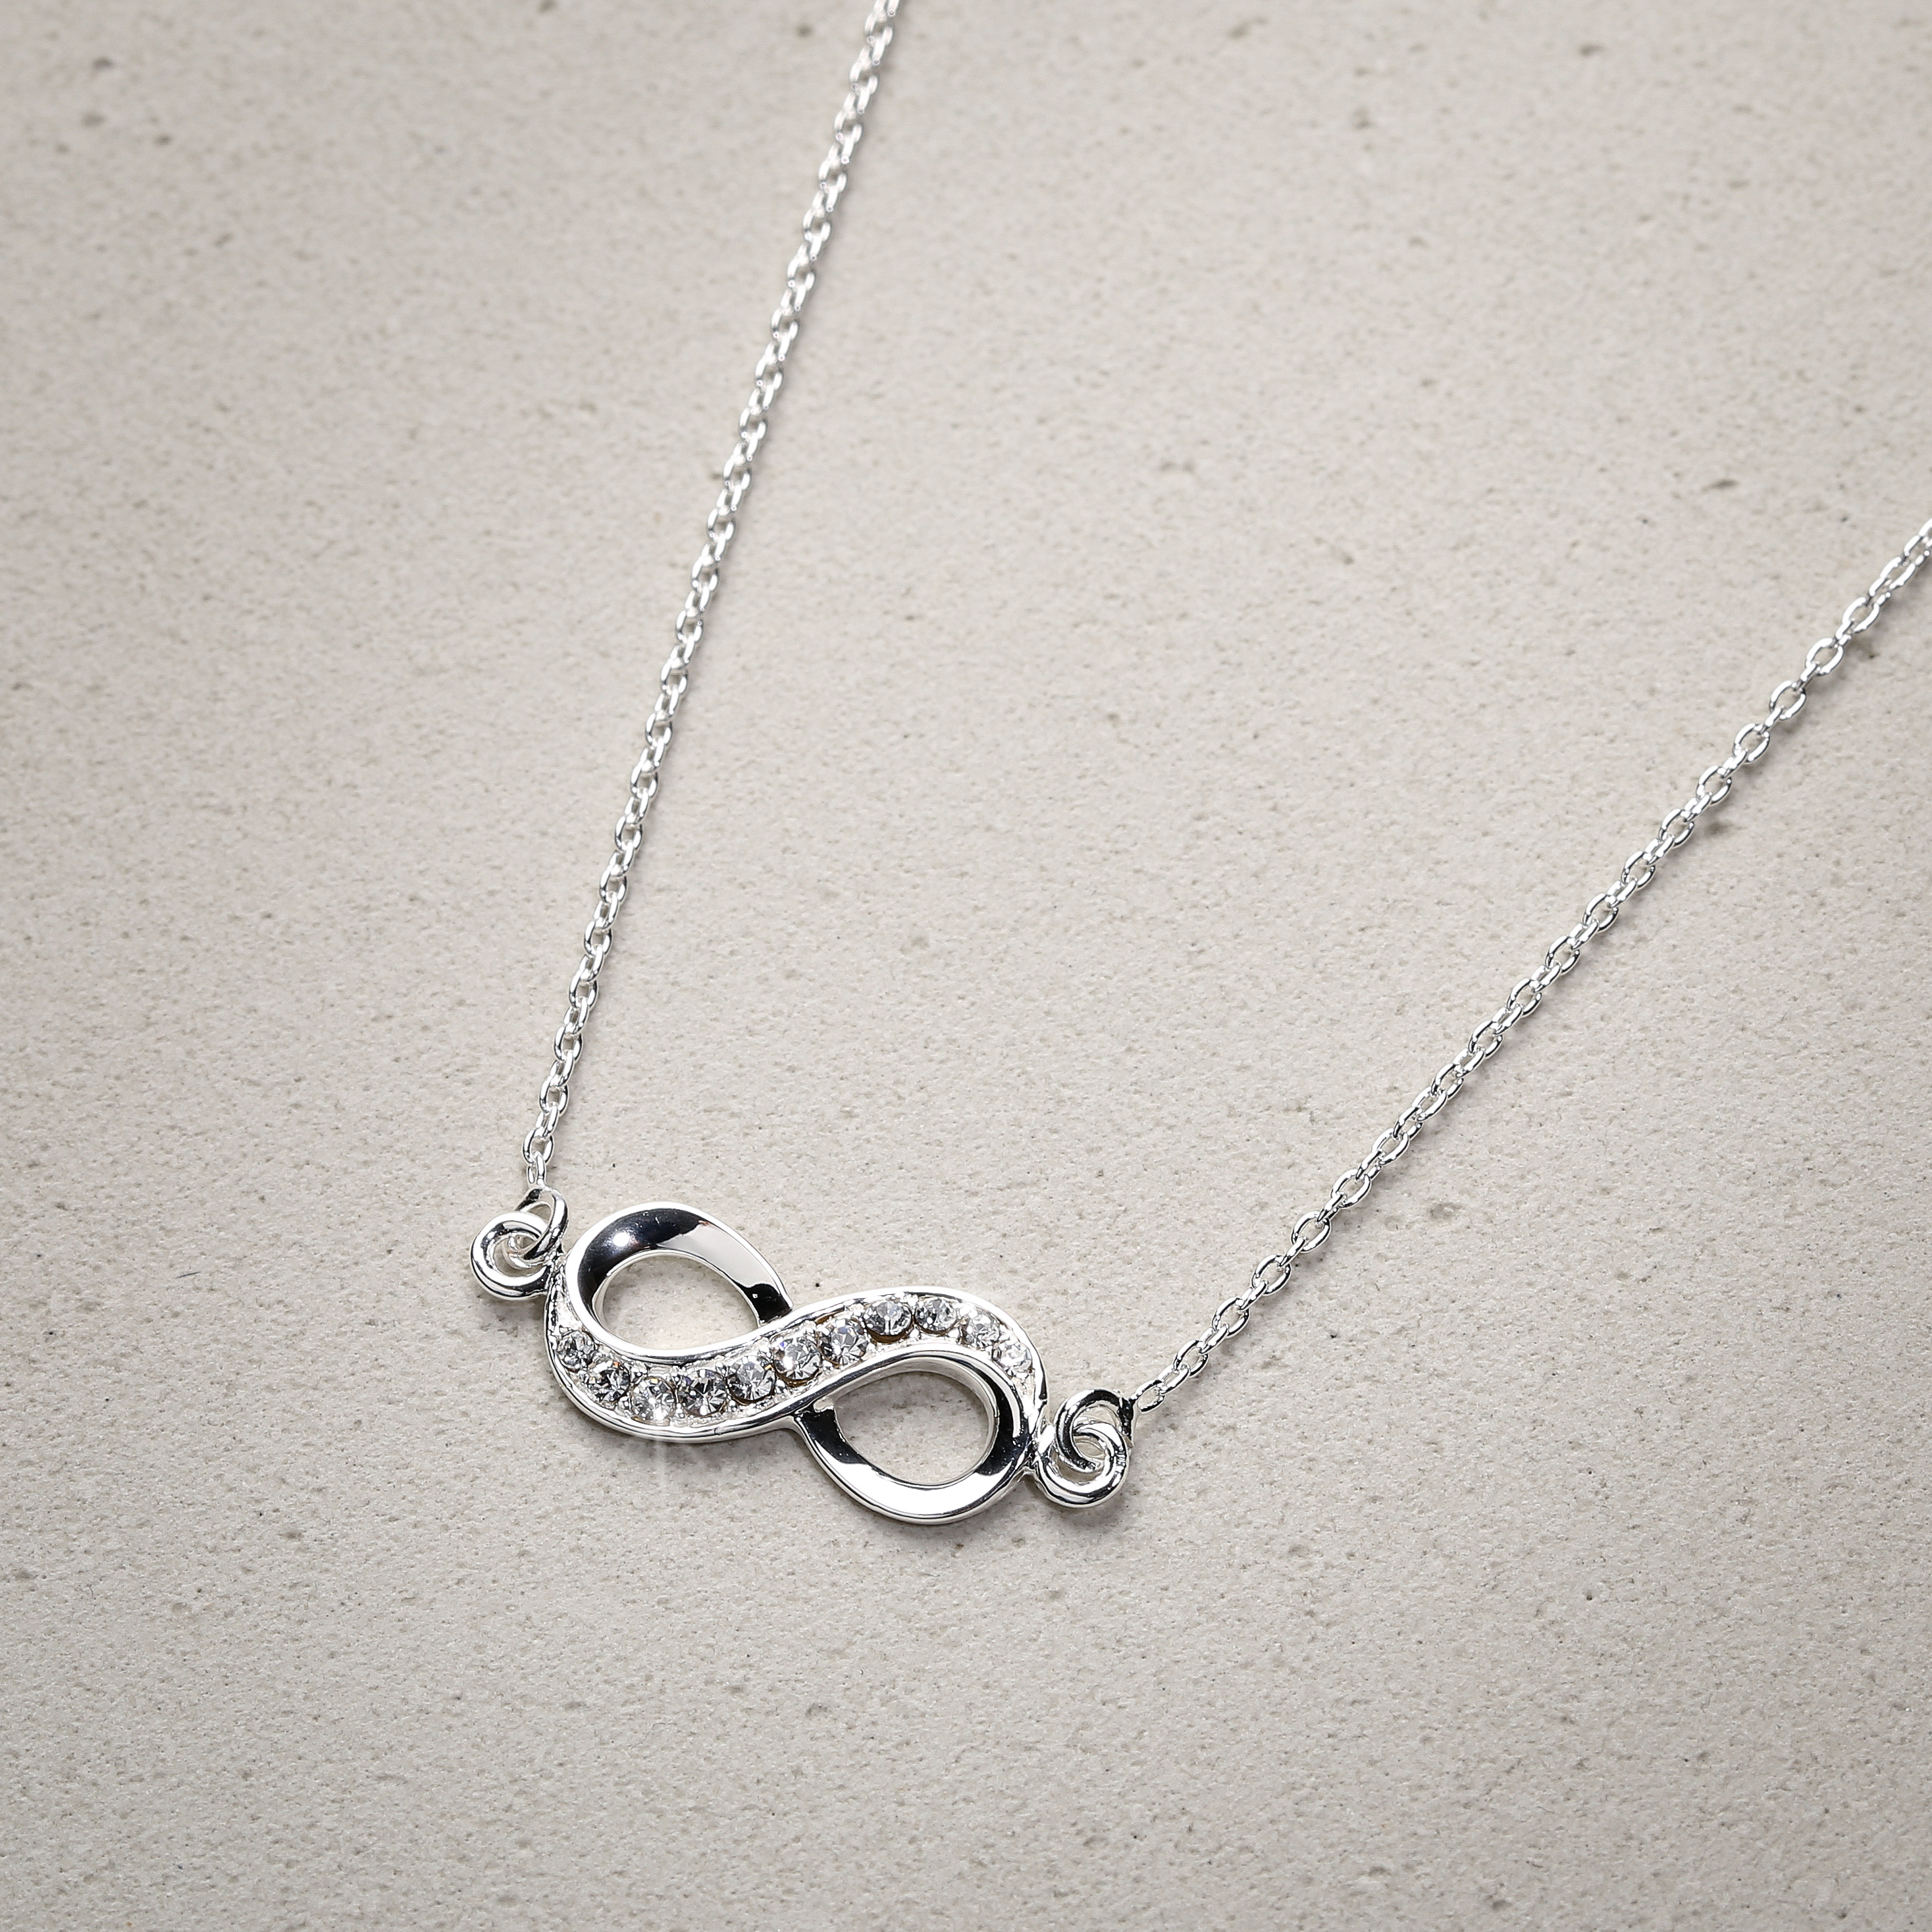 Necklace - Sweet Silver Infinity